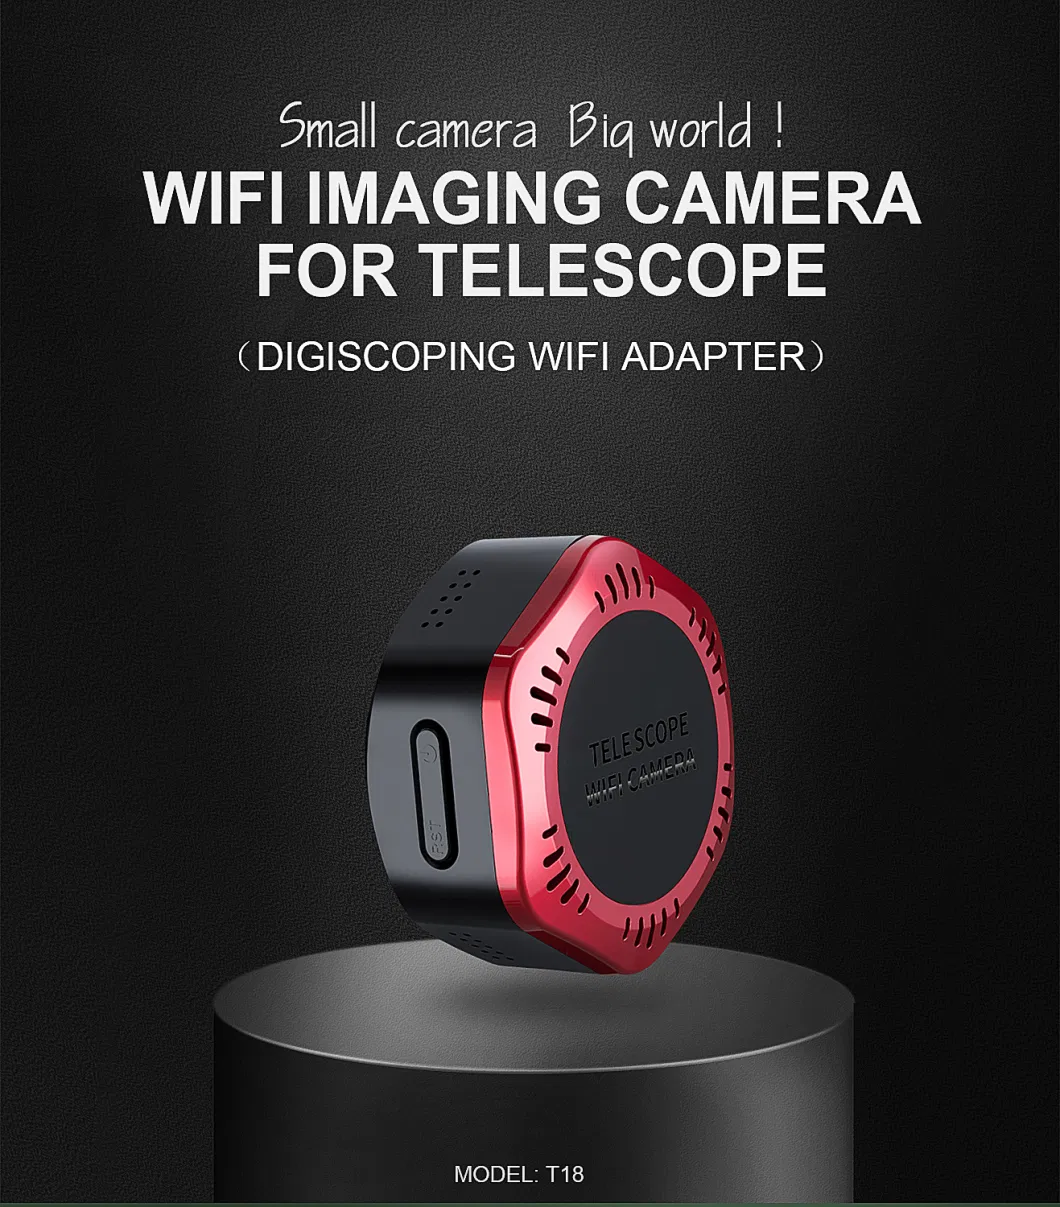 Visionking 1920X1080 Pixels CMOS Monochrome Astronomy Camera with USB WiFi APP